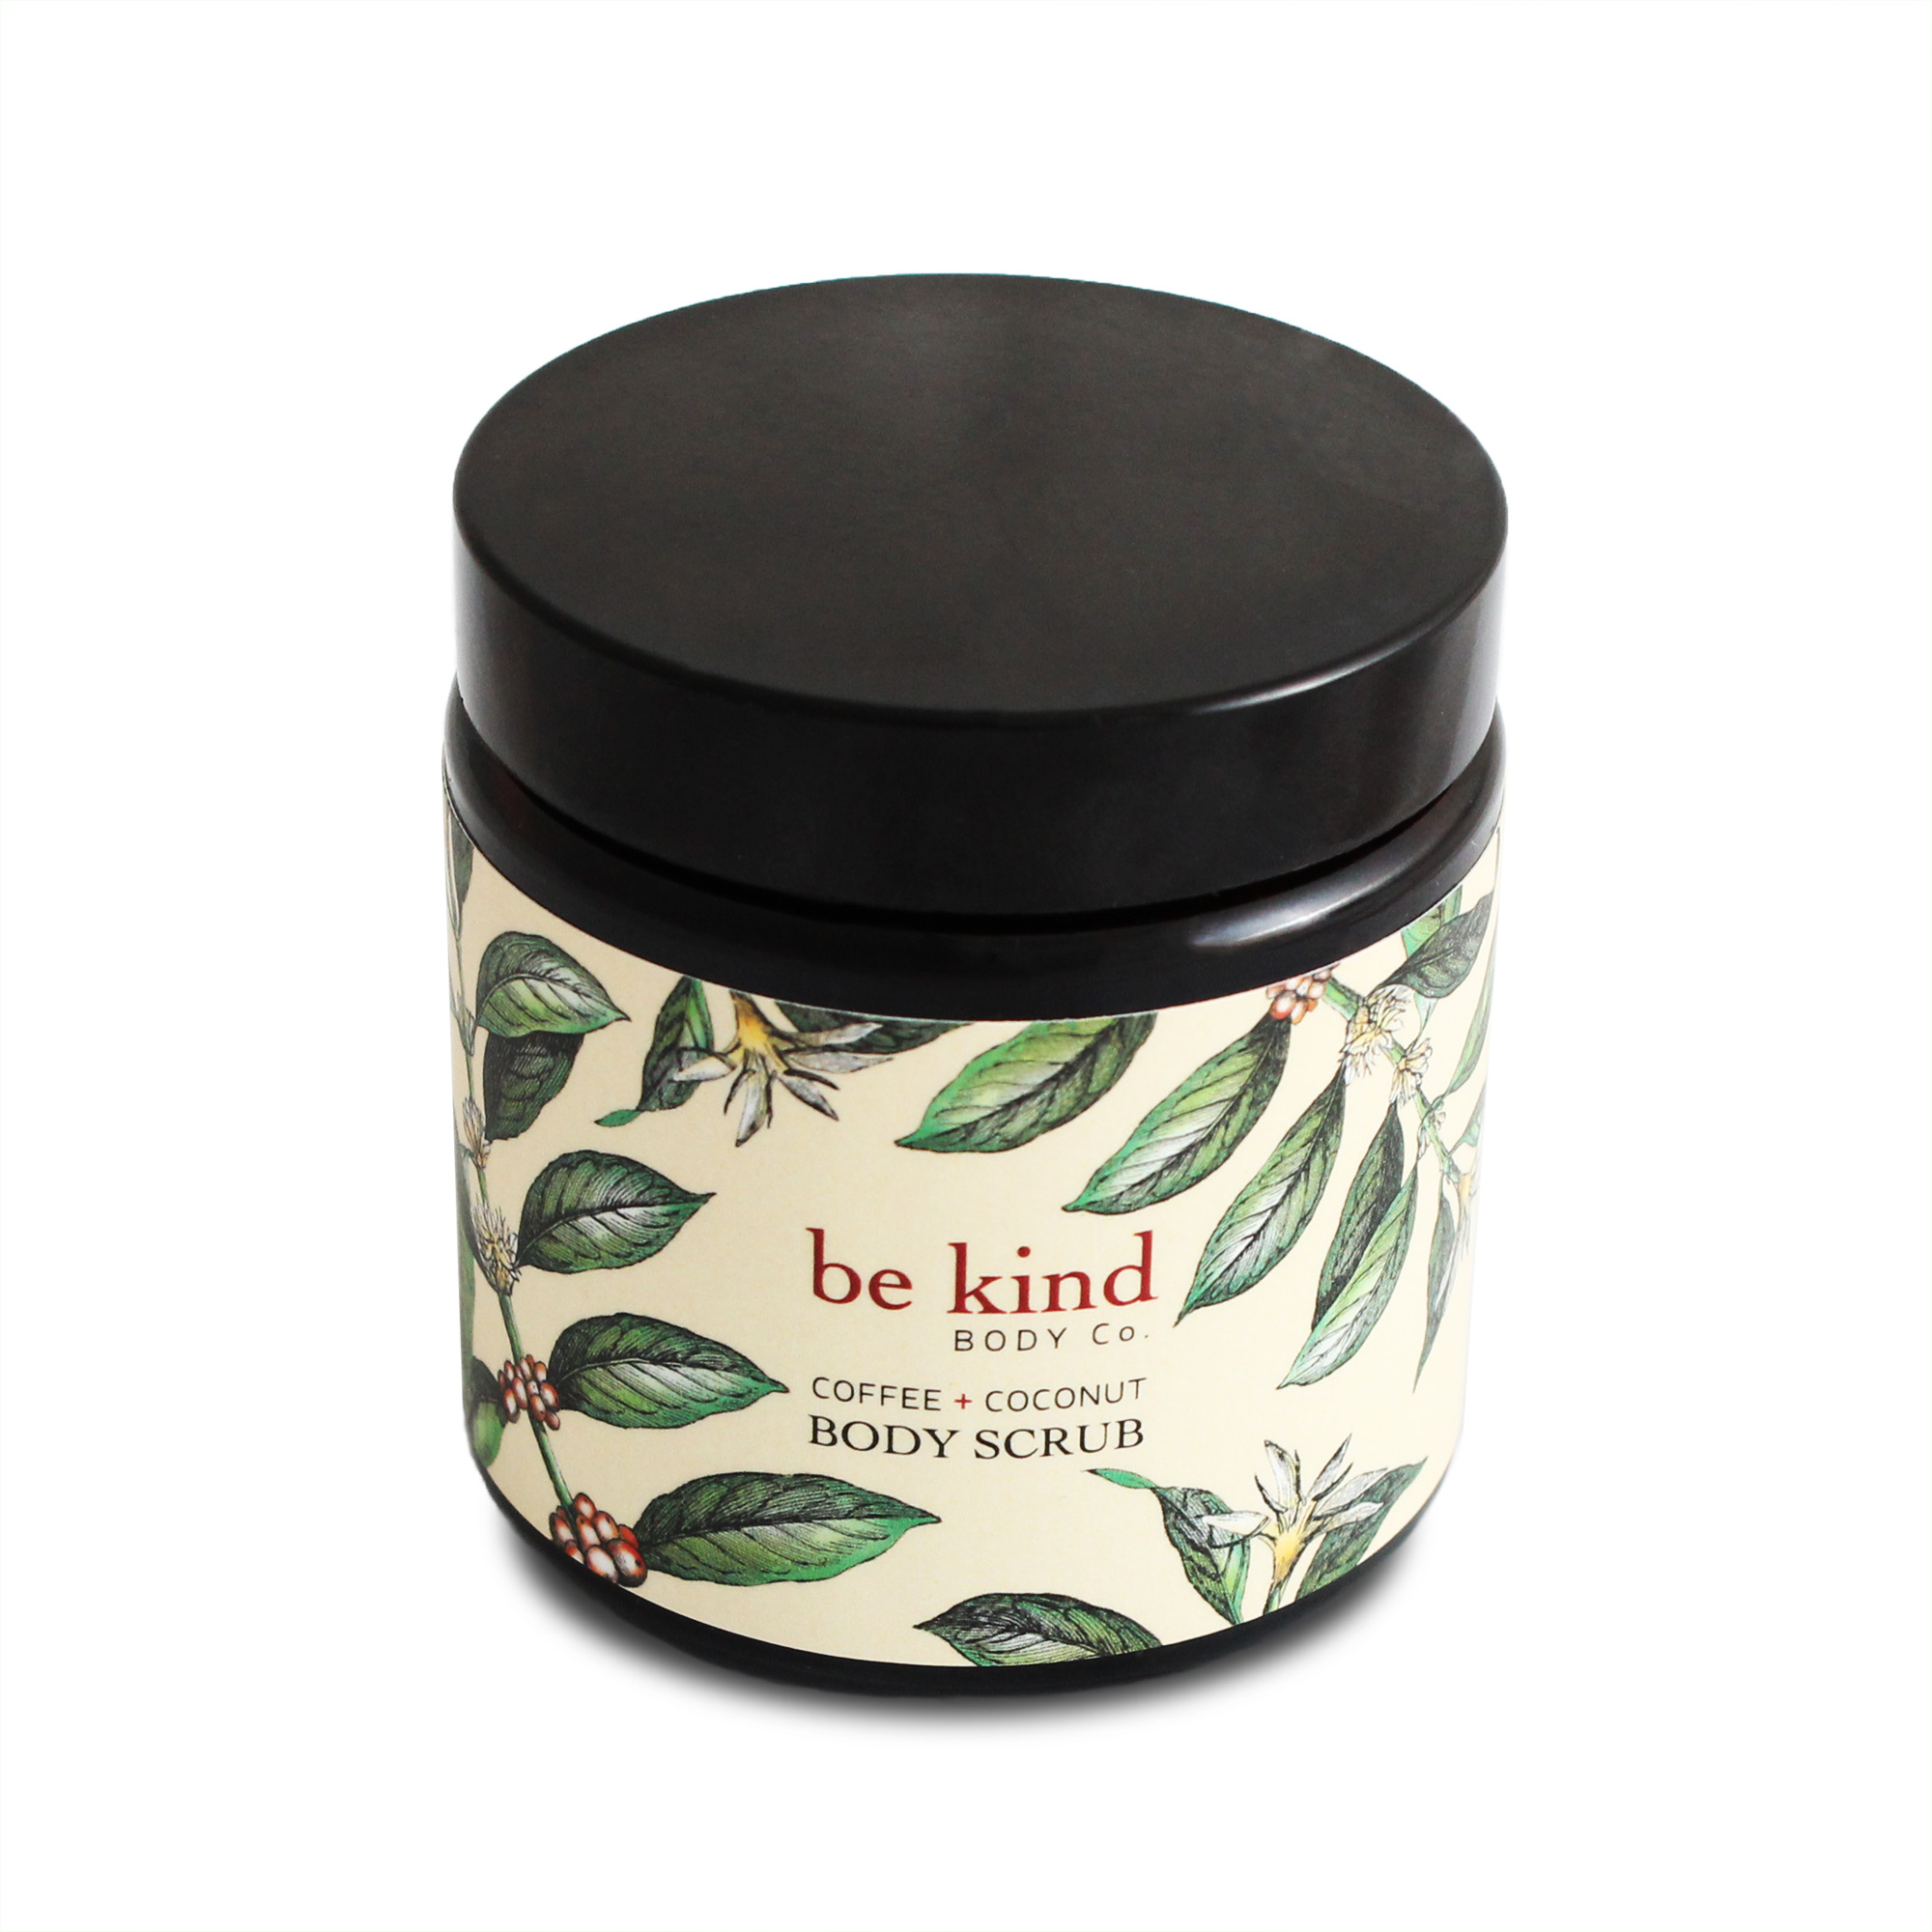 Be Kind Body Co body scrub, $25, from Ohnatural.co.nz